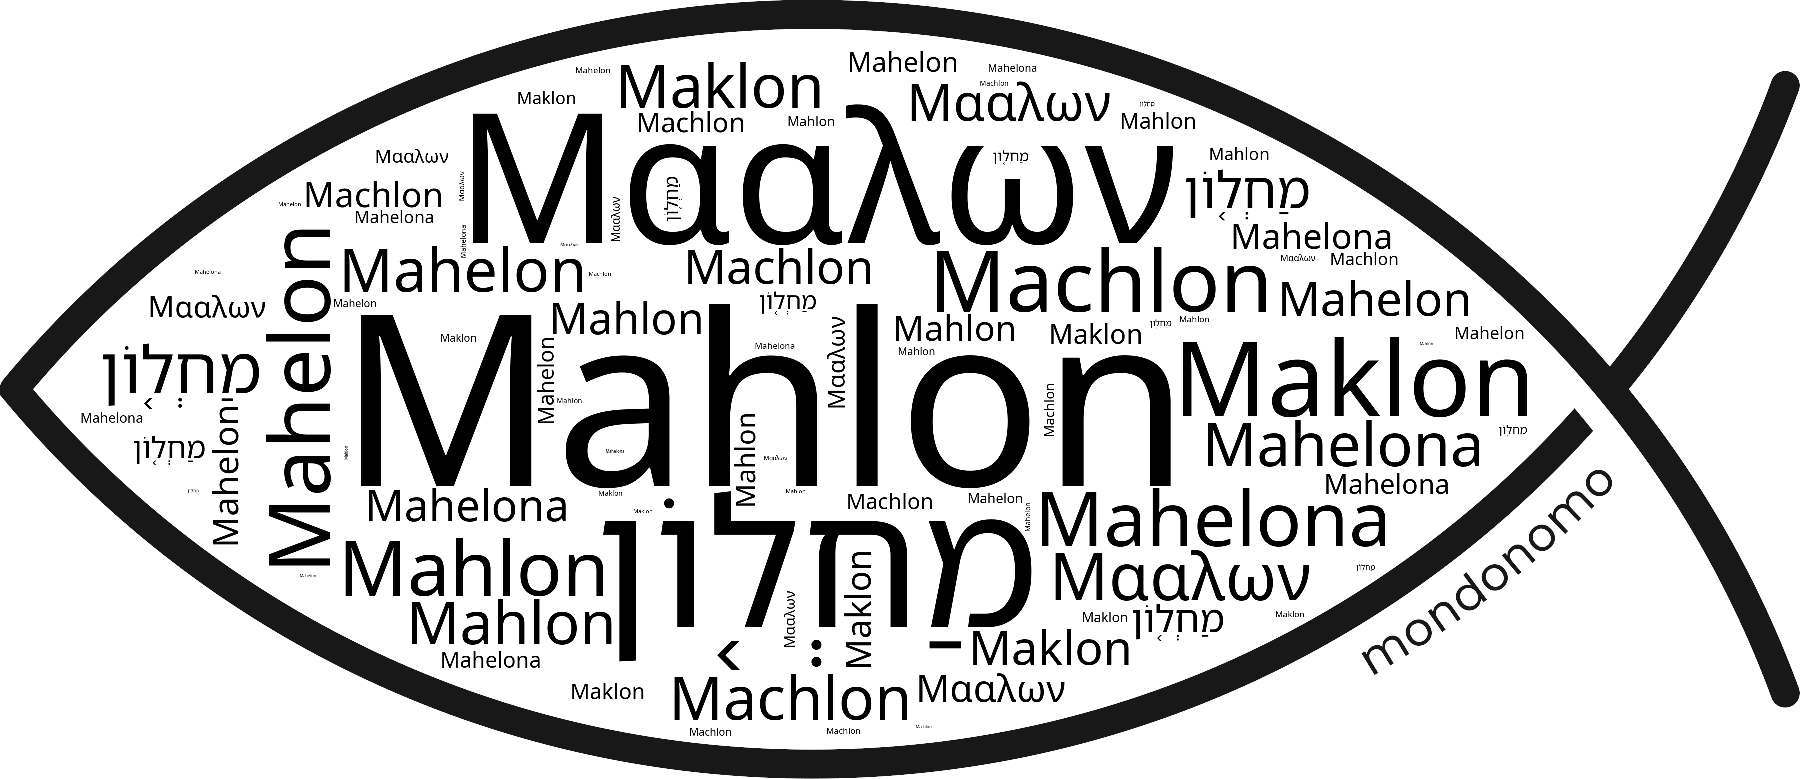 Name Mahlon in the world's Bibles